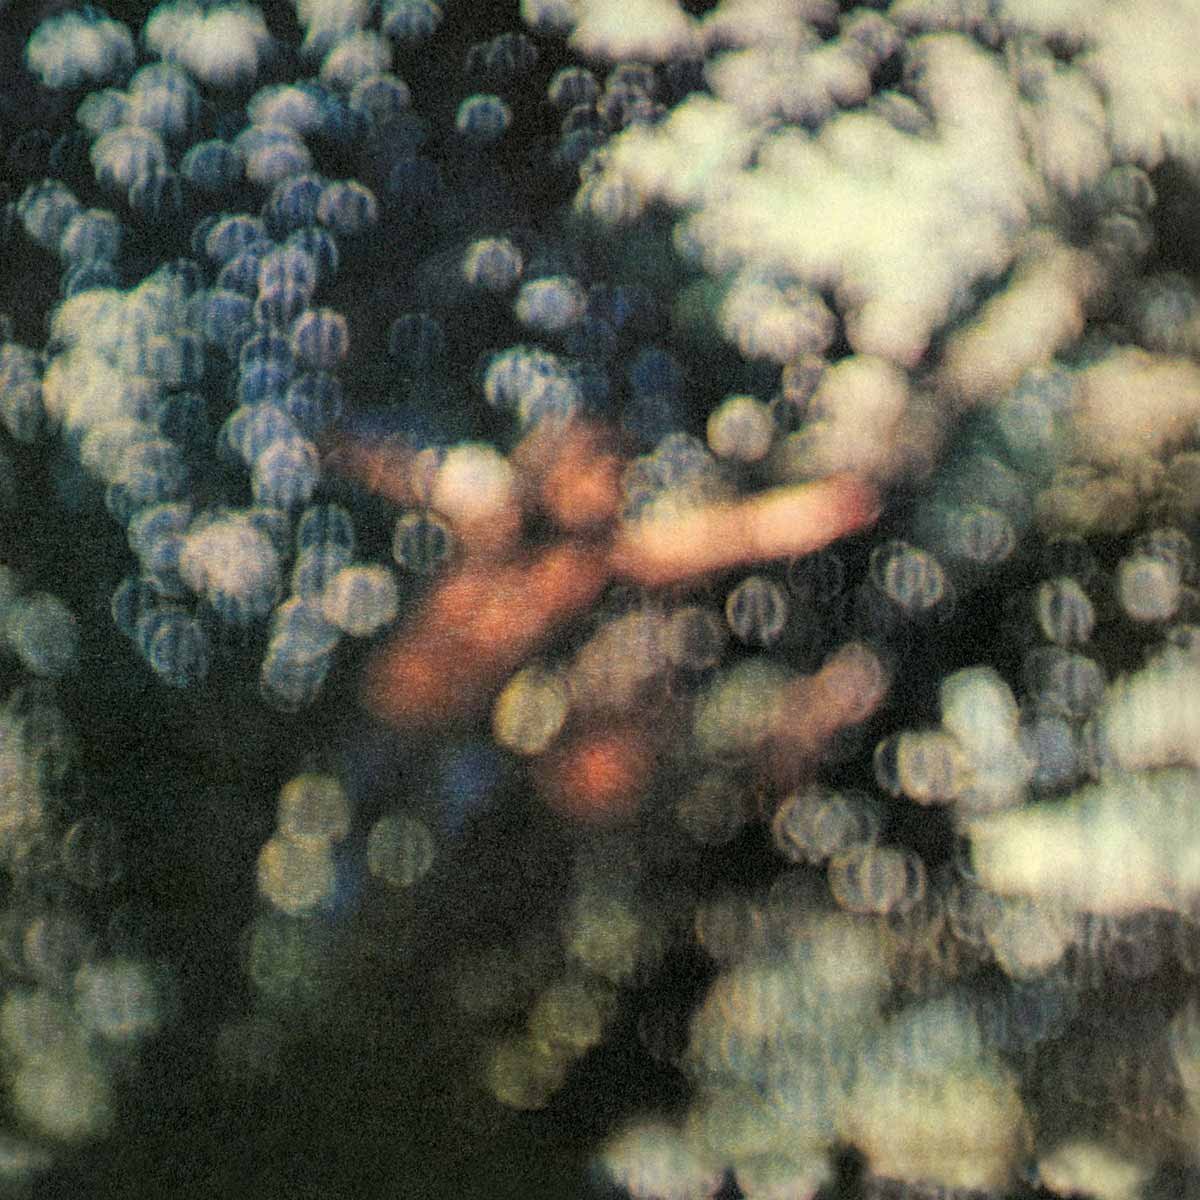 Pink Floyd Obscured By Clouds